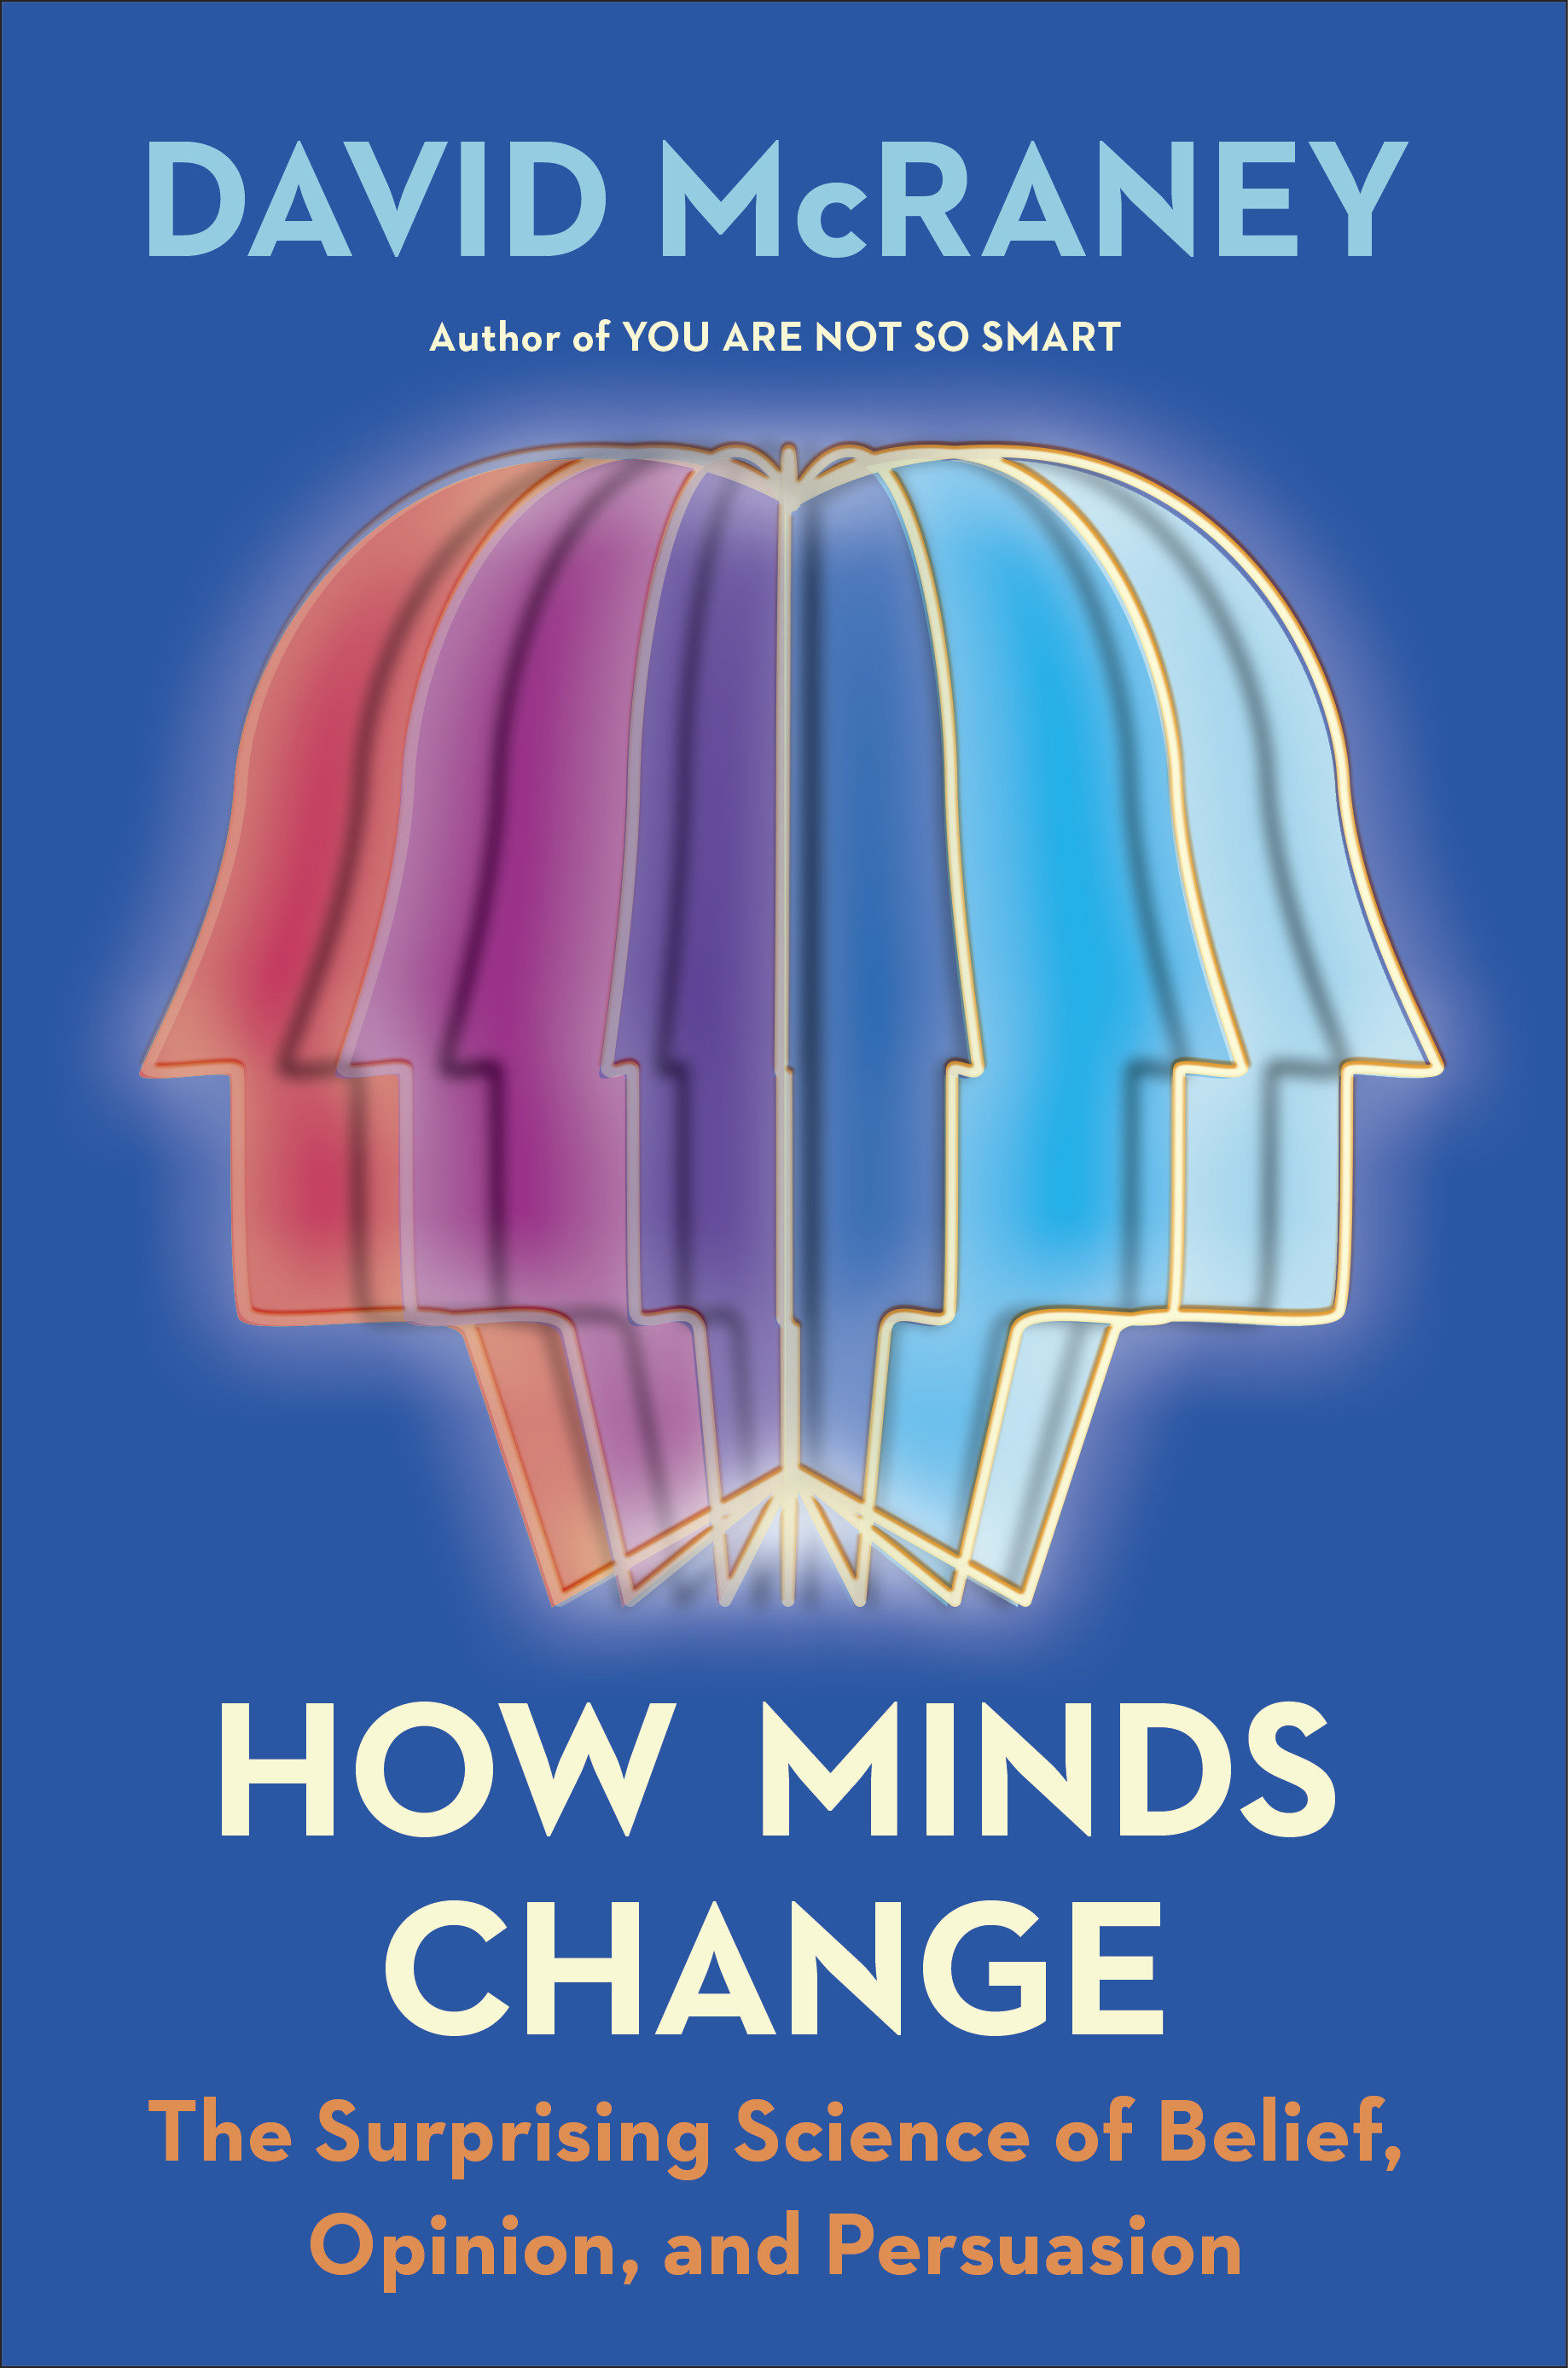 How Minds Change (Hardcover Book)